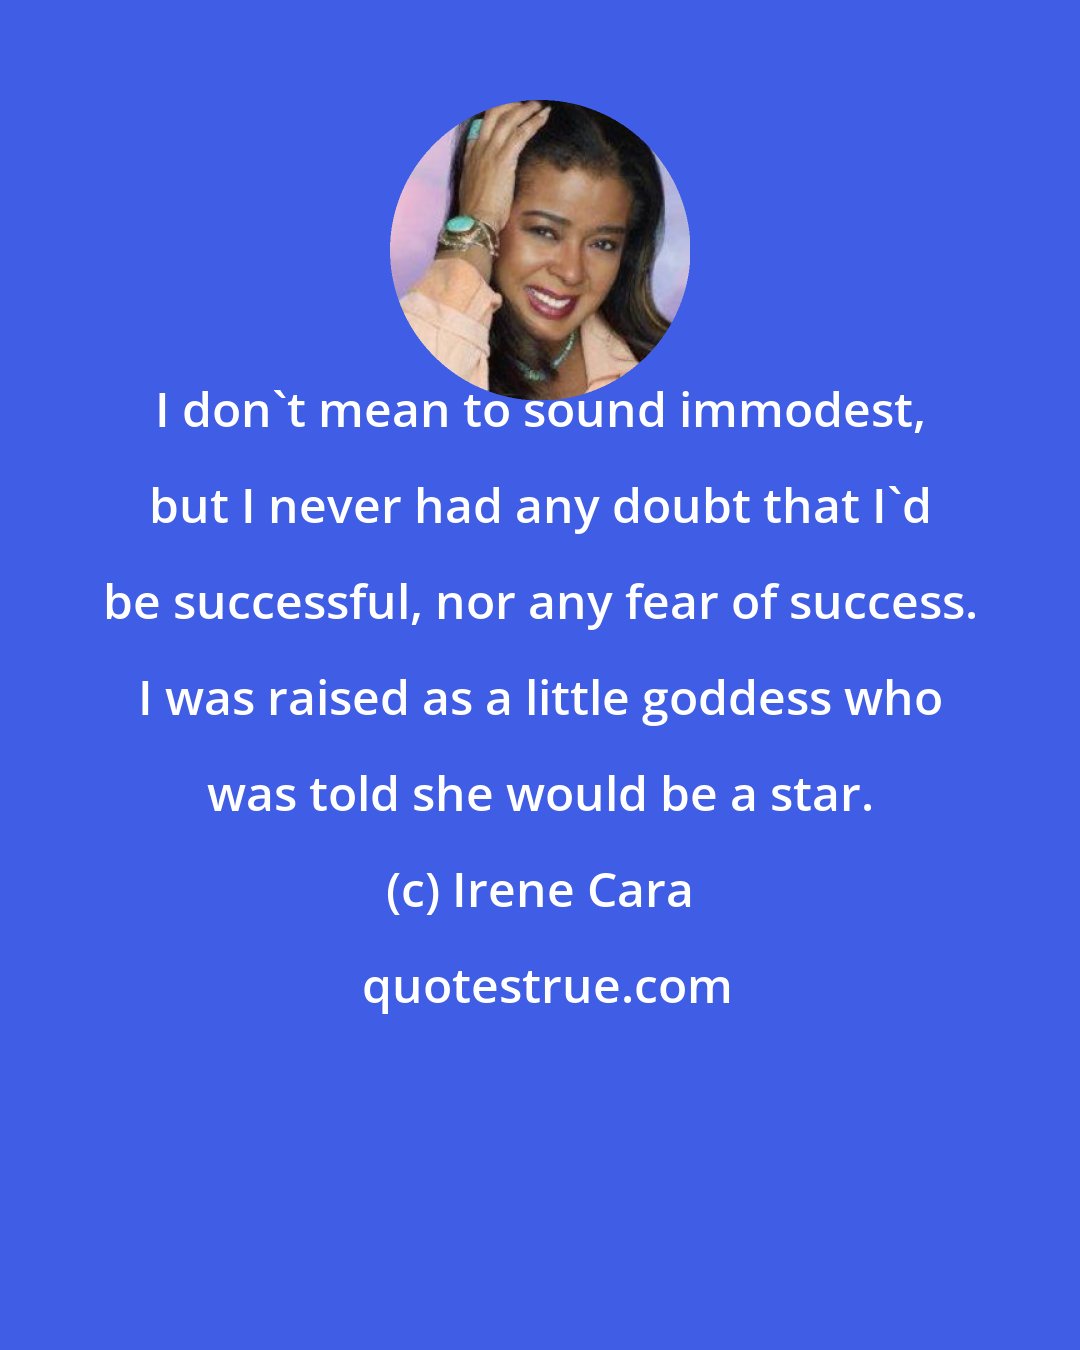 Irene Cara: I don't mean to sound immodest, but I never had any doubt that I'd be successful, nor any fear of success. I was raised as a little goddess who was told she would be a star.